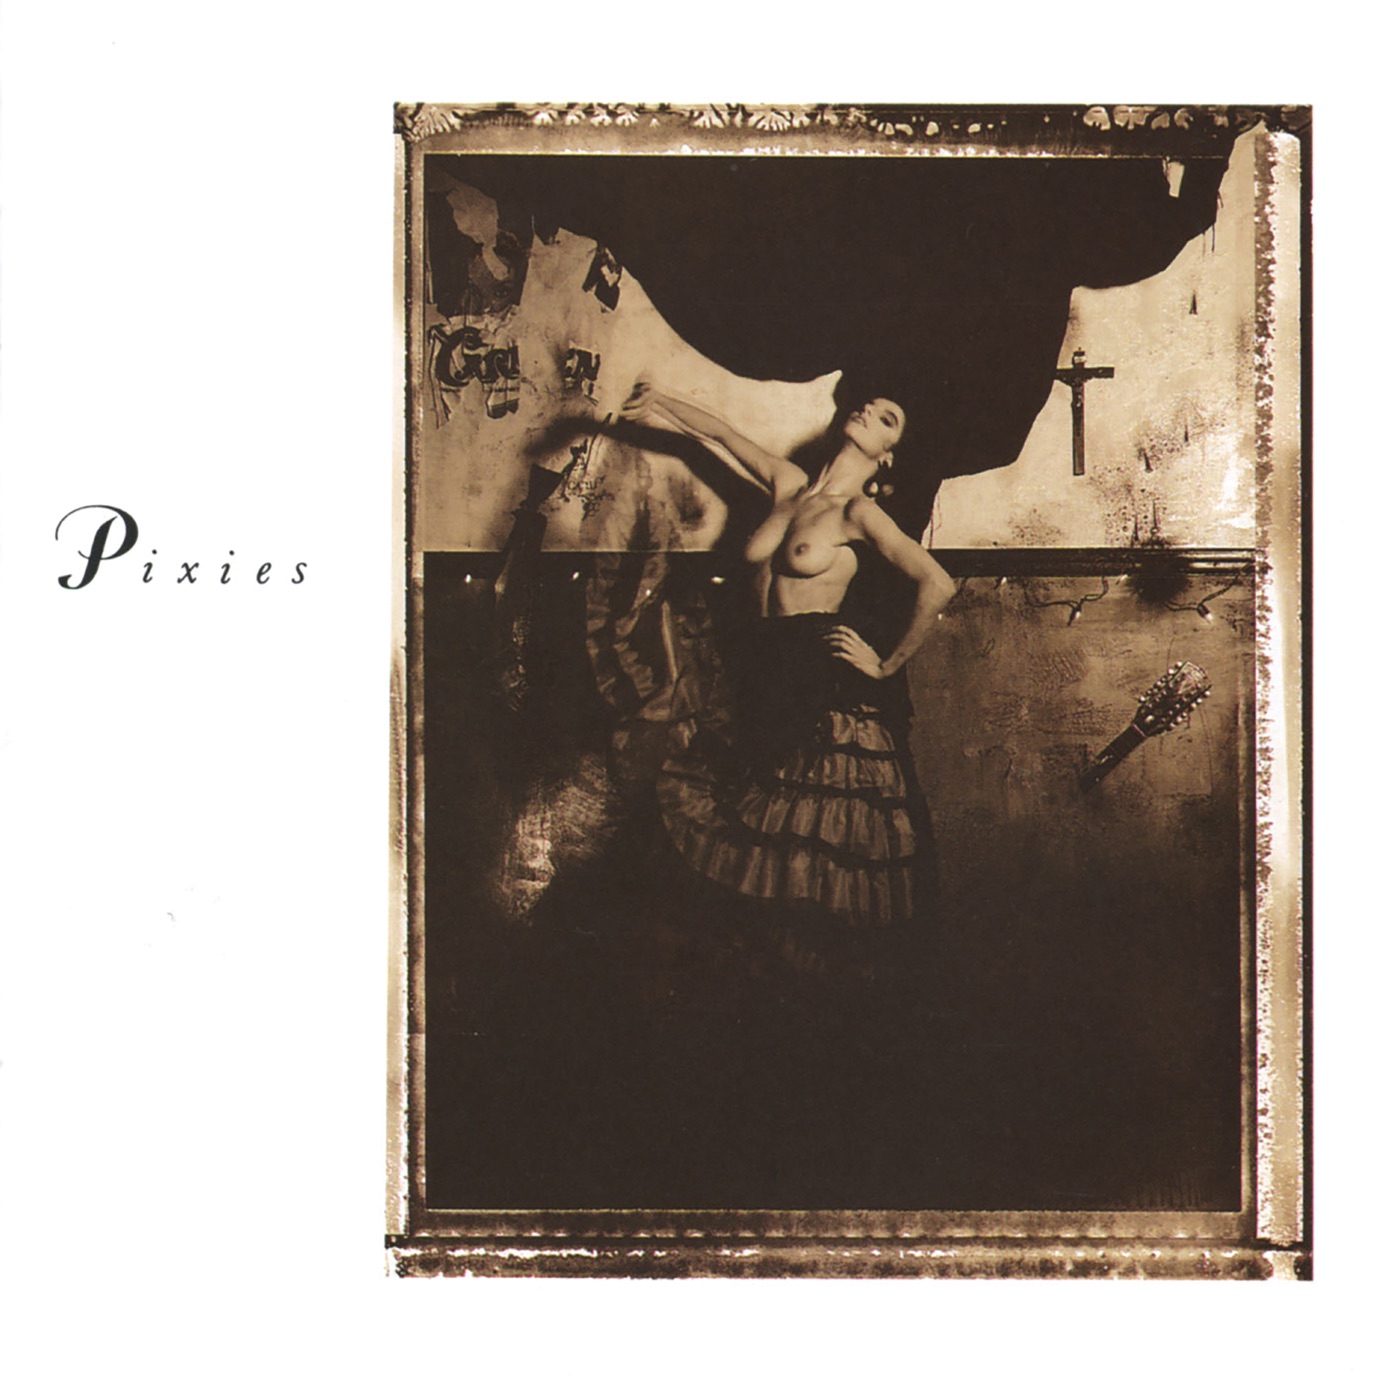 Surfer Rosa by Pixies